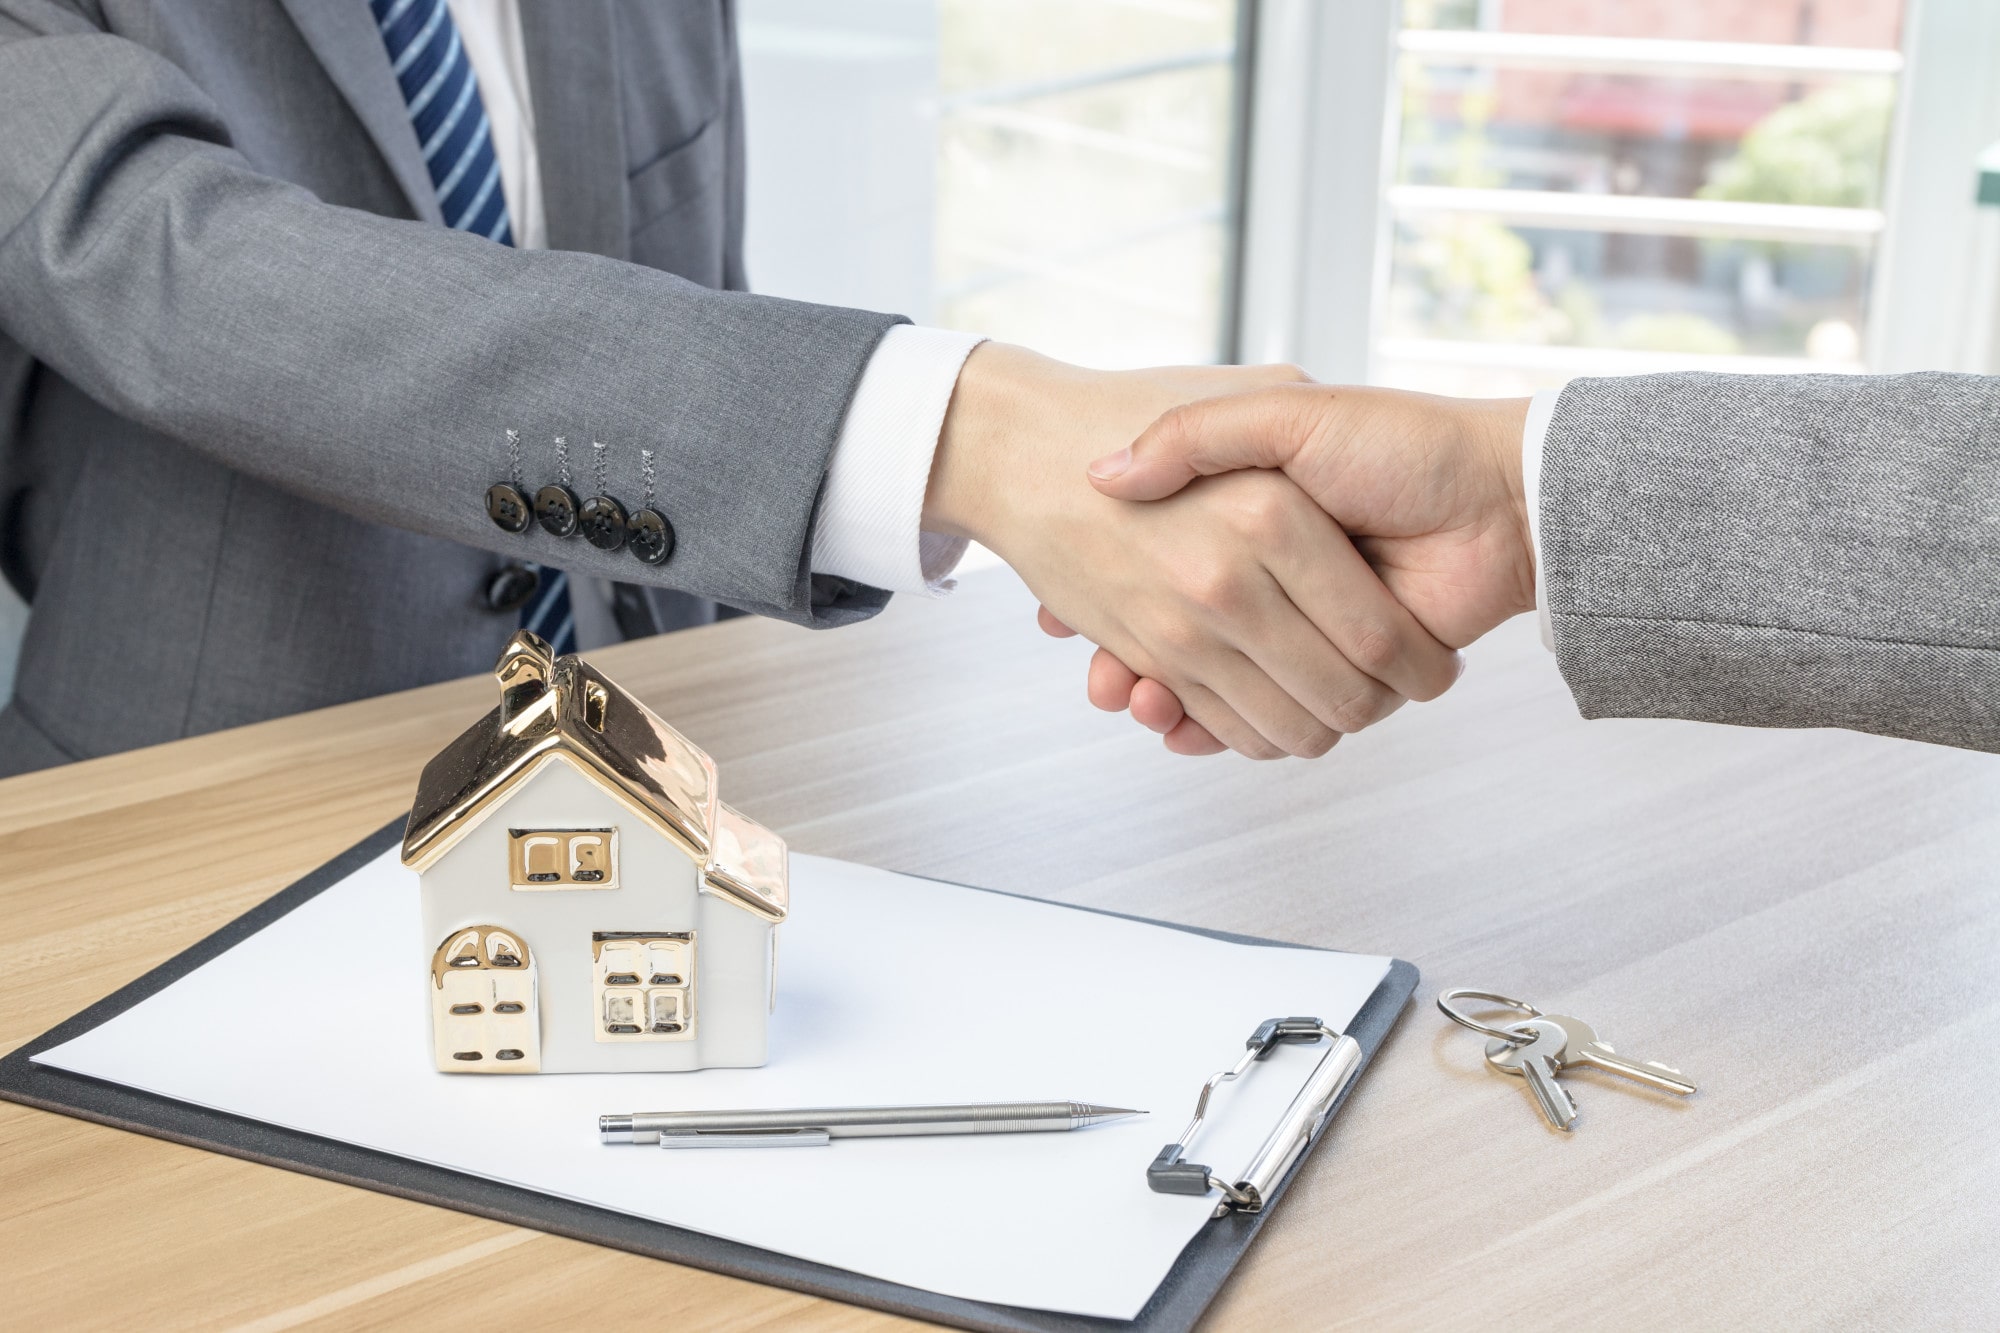 4 Signs You Need Property Management Services for Your Investment Property